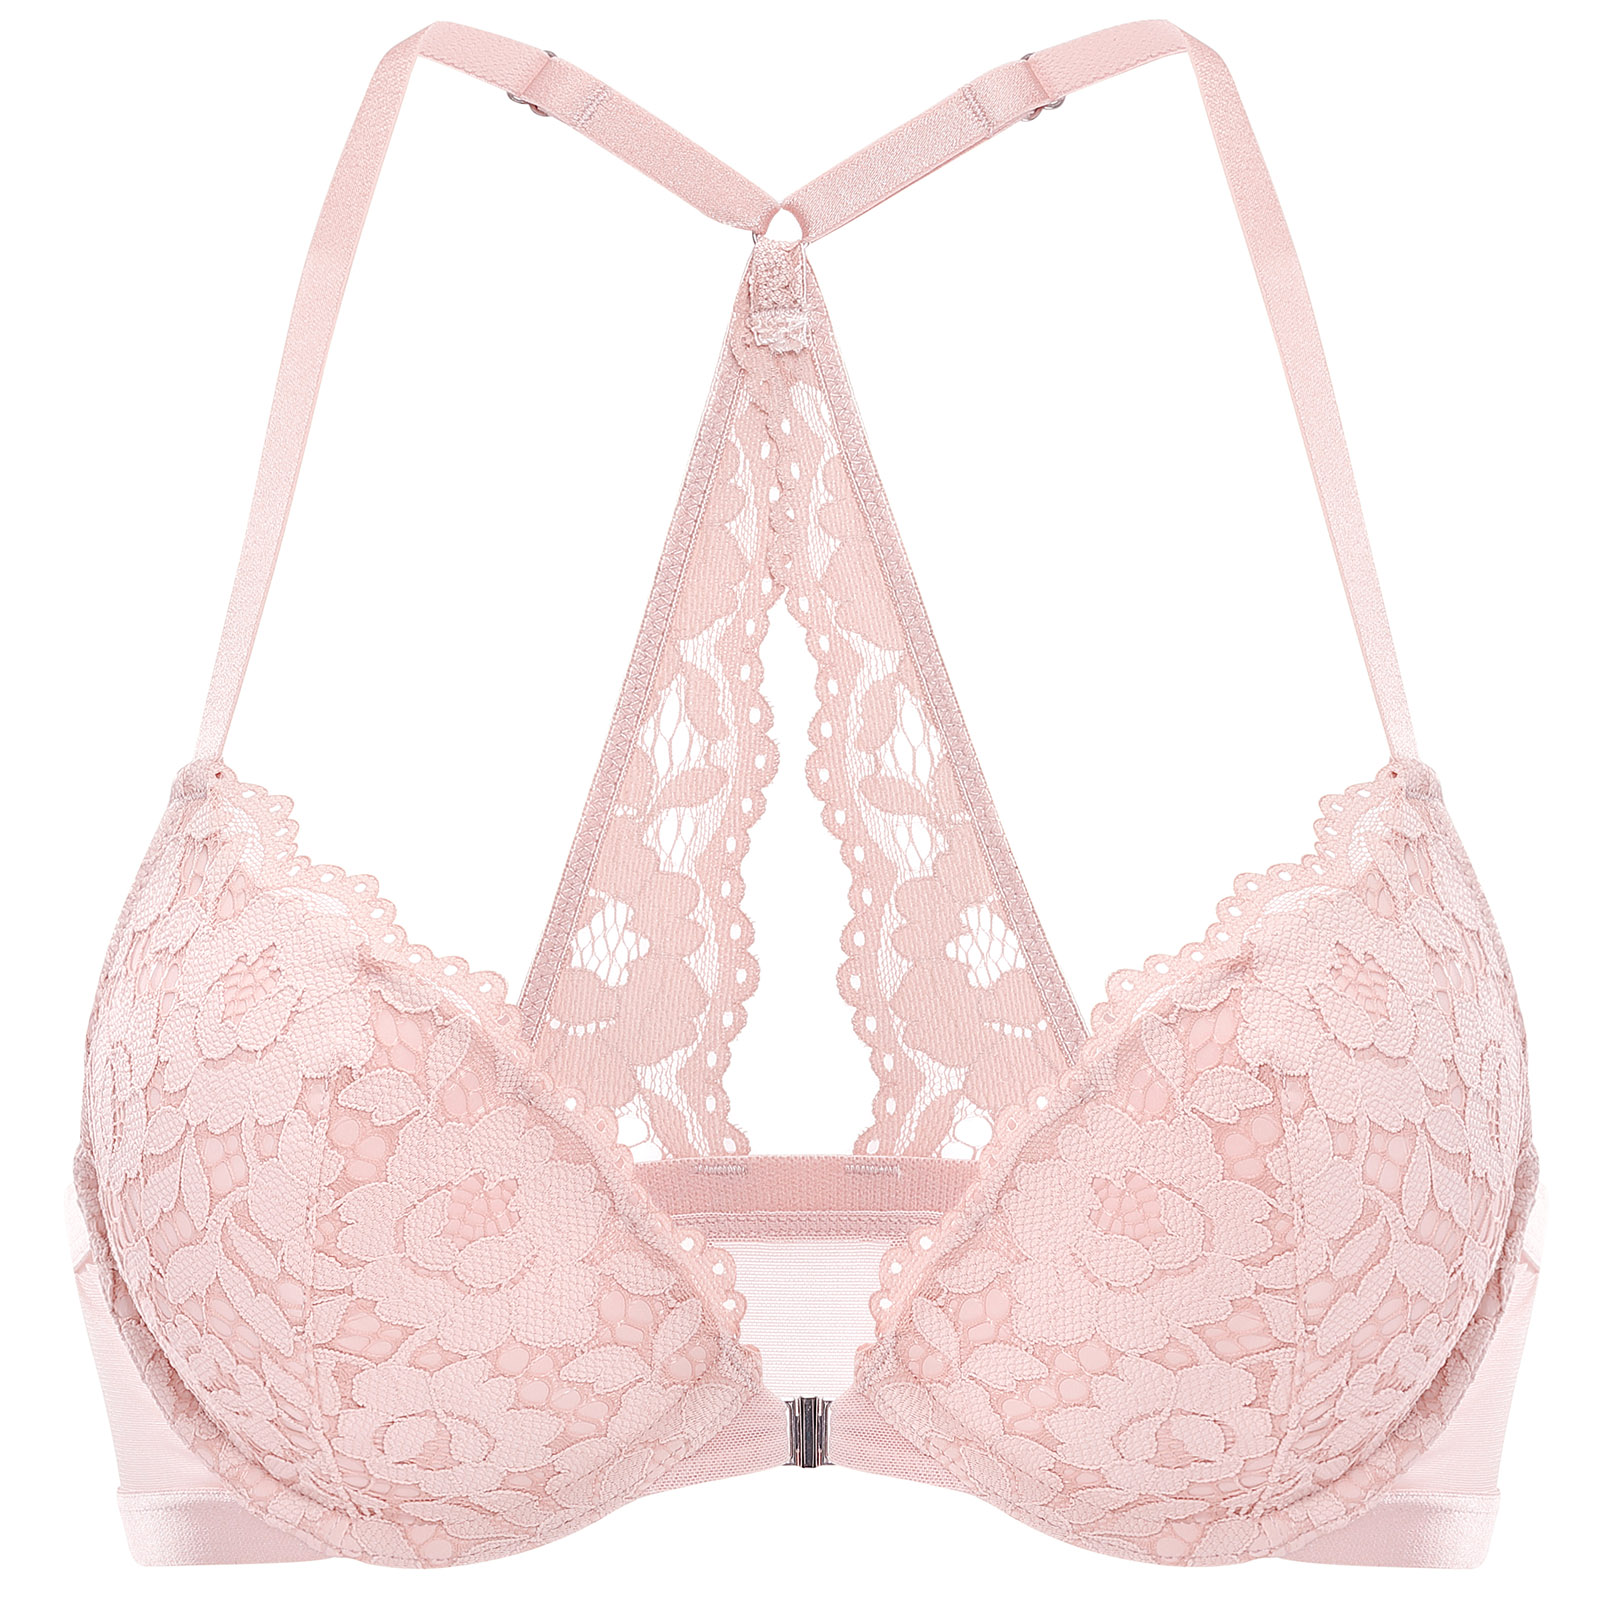 Stamens Front Closure Bras Lace Underwear Bralette Breathable Push Up  Brassiere Without Underwire(Pink,34b)